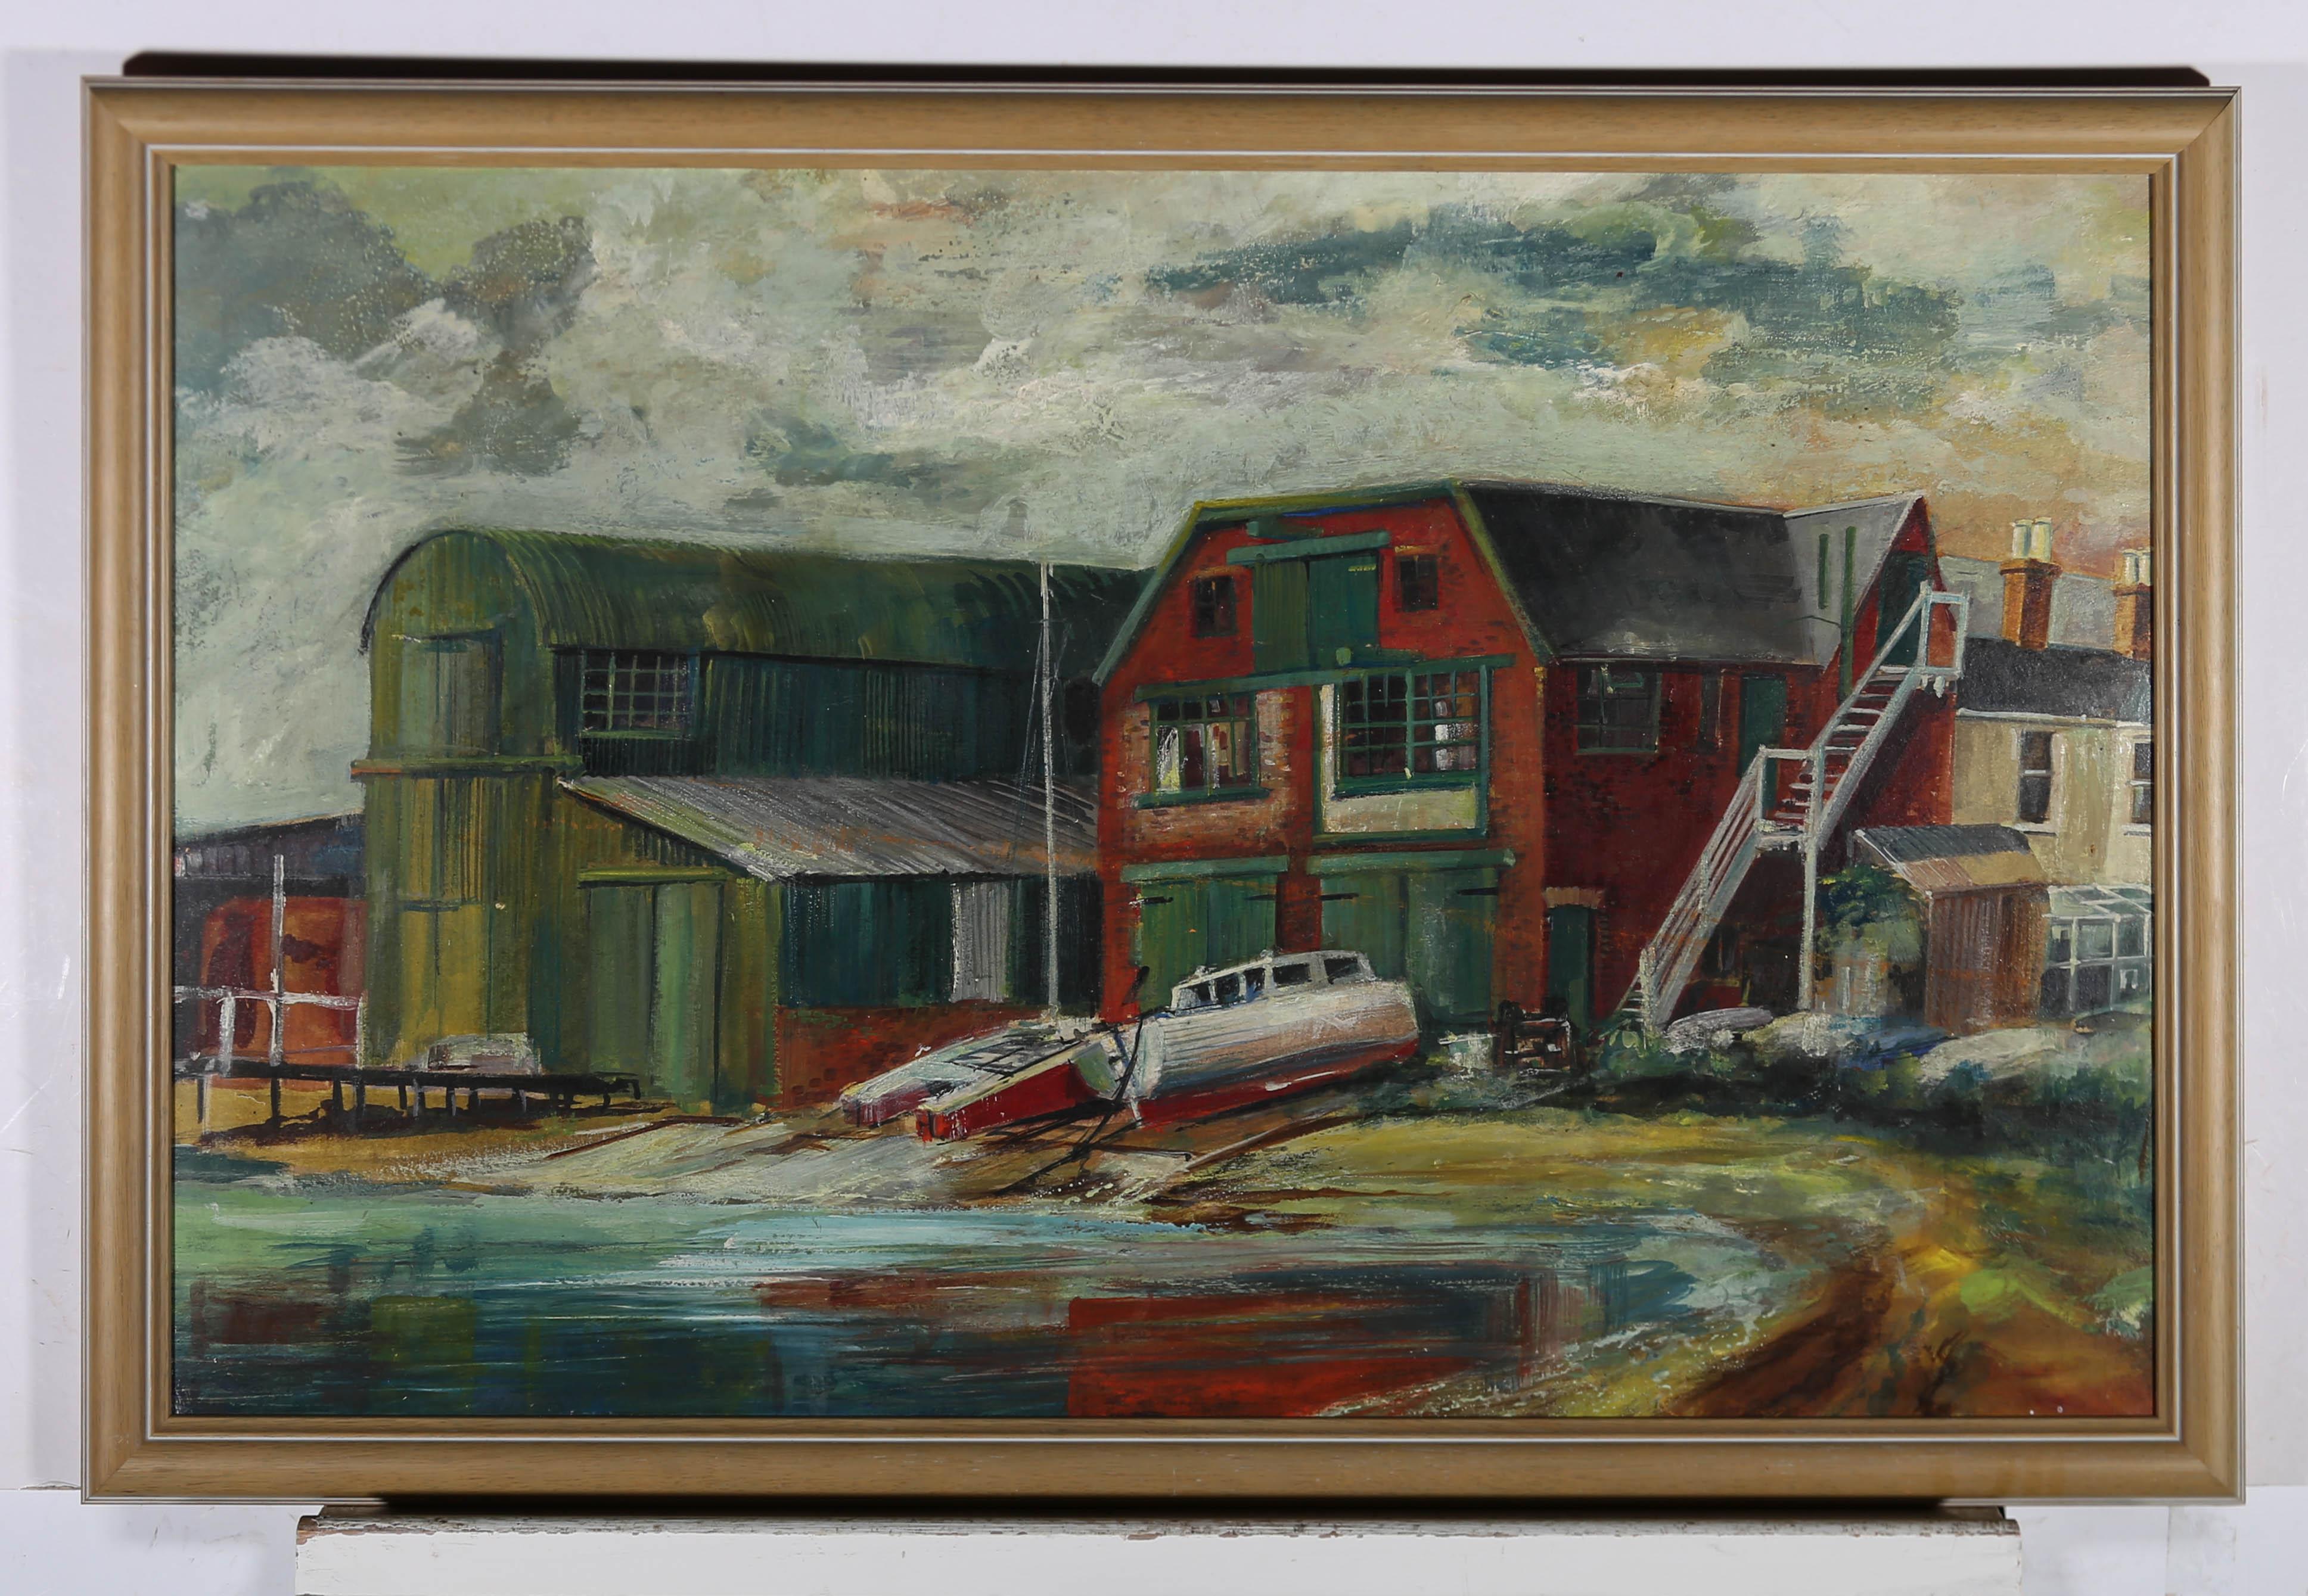 A wonderful study of an old industrial English boatyard with red brick outhouses and little fishing boats. Well presented in a contemporary wood frame. Unsigned. On board.
